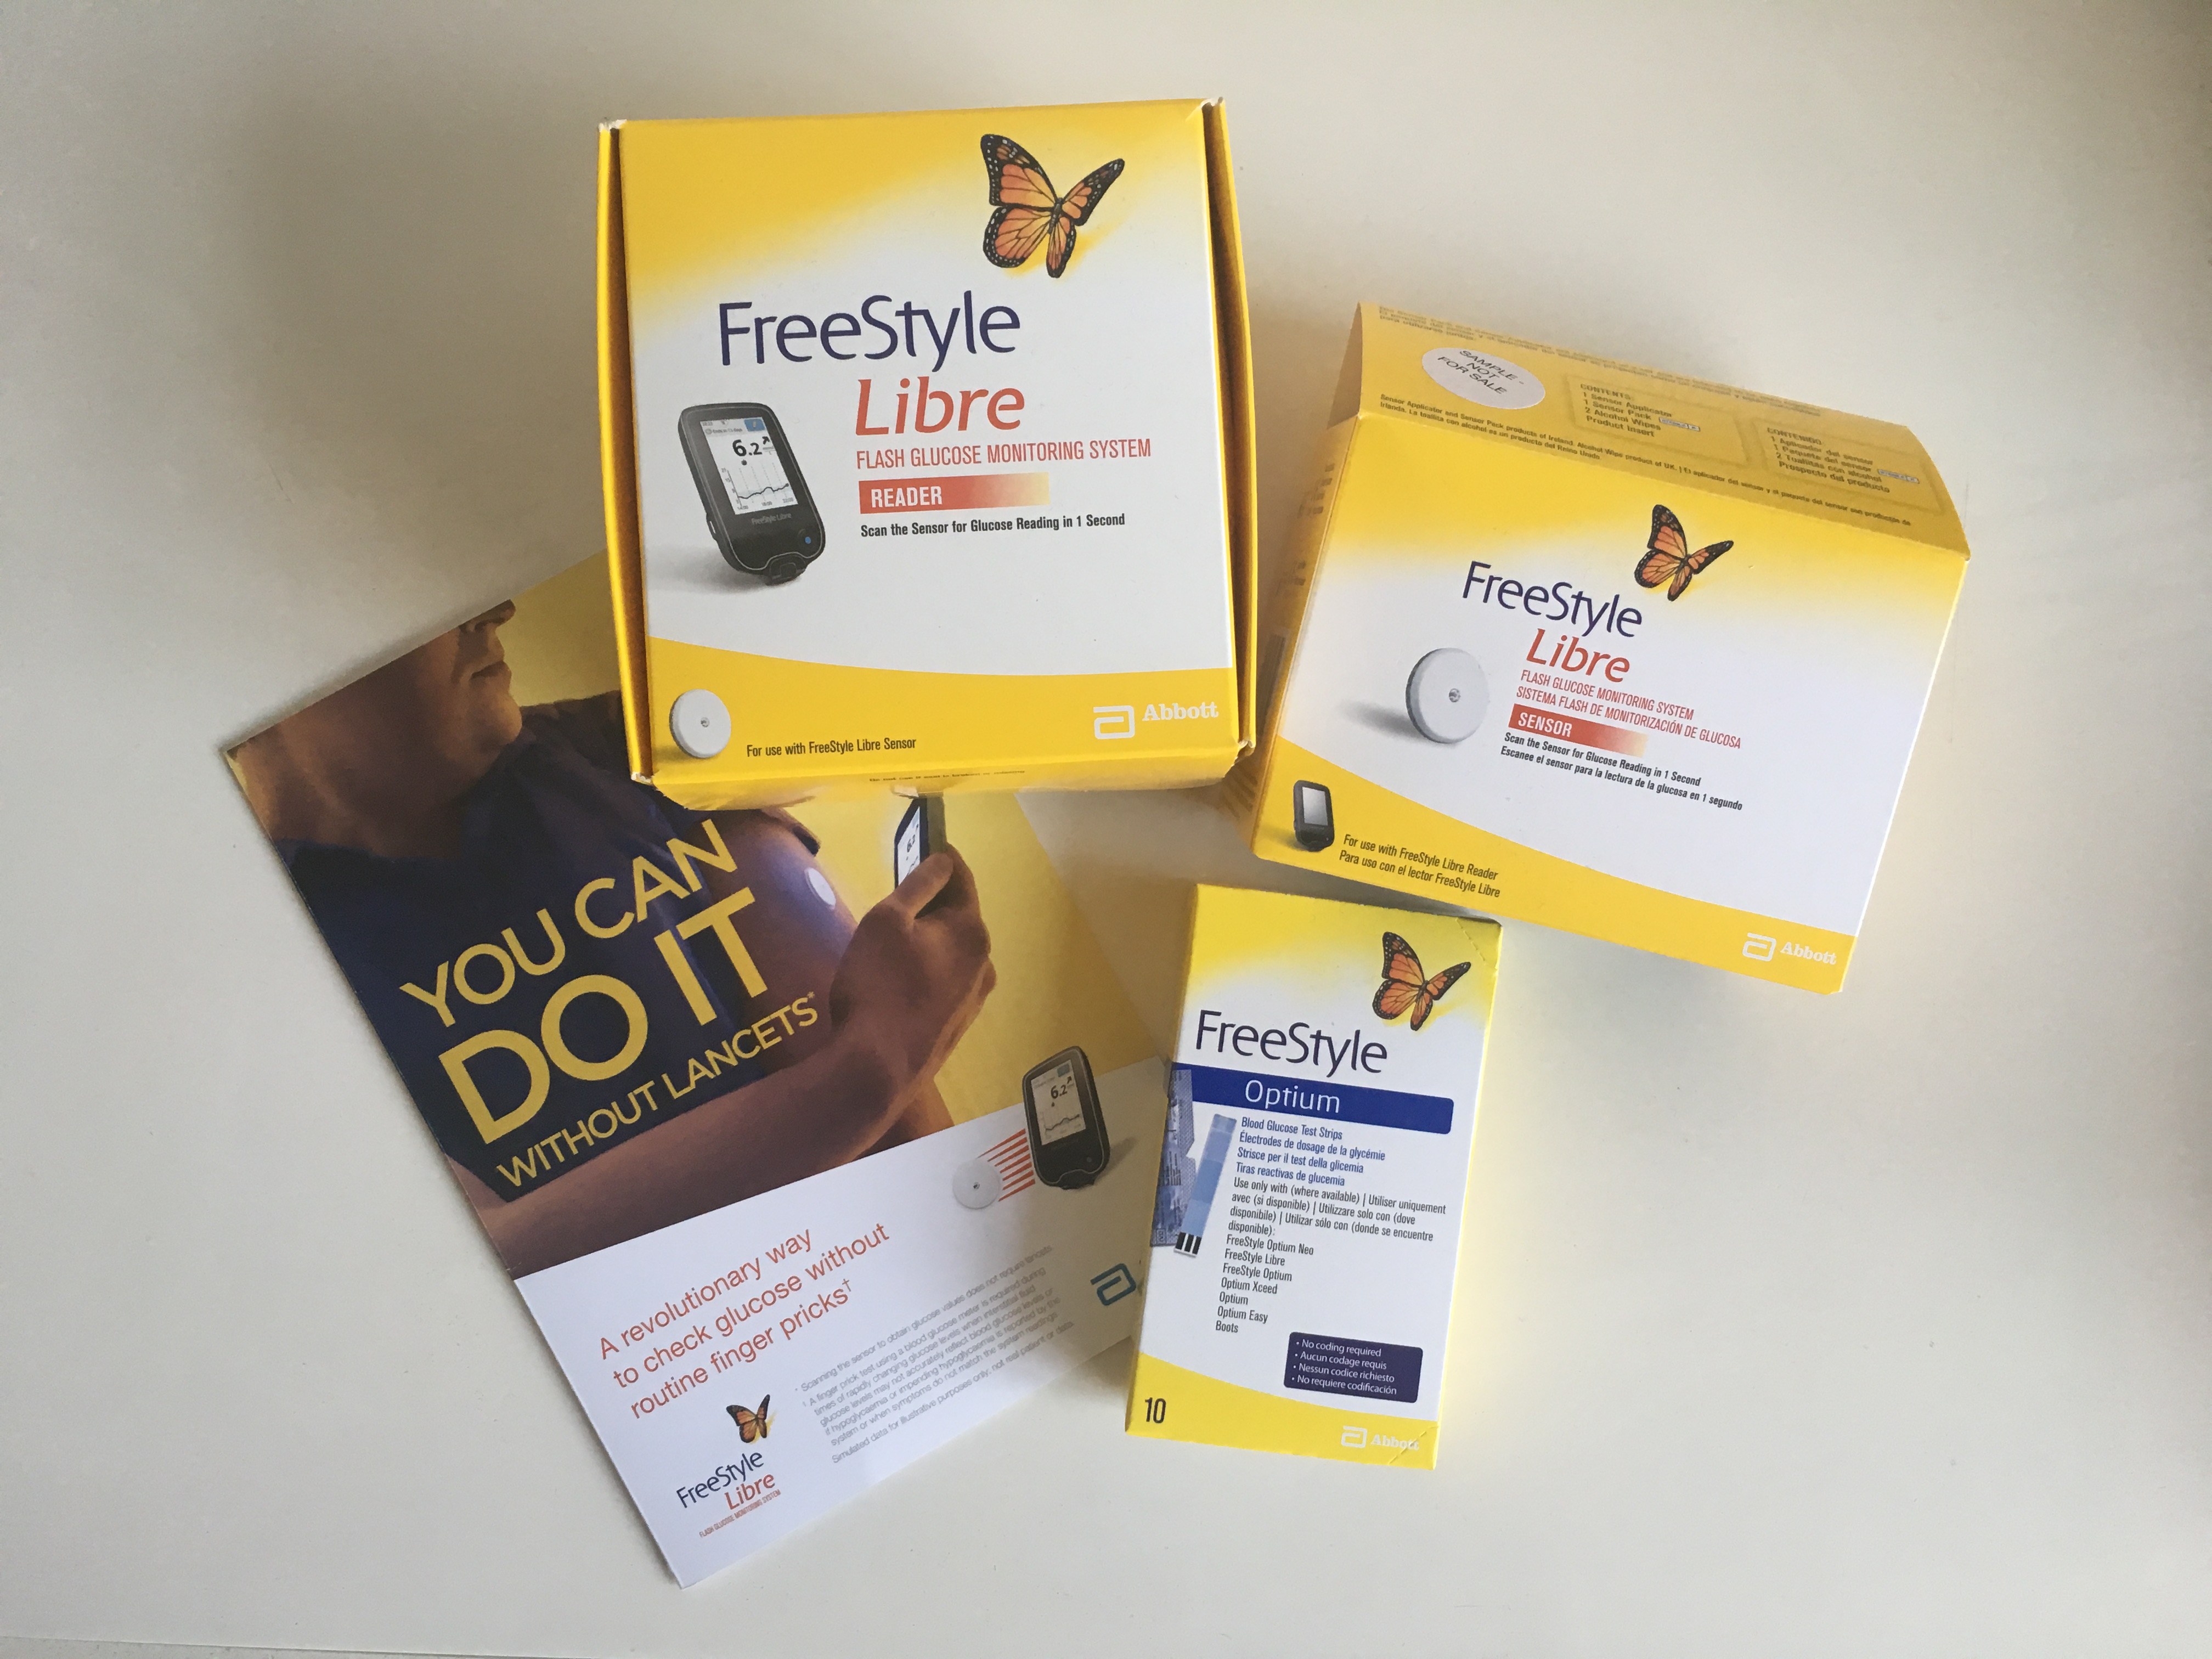 1 Freestyle Libre 14 Day User